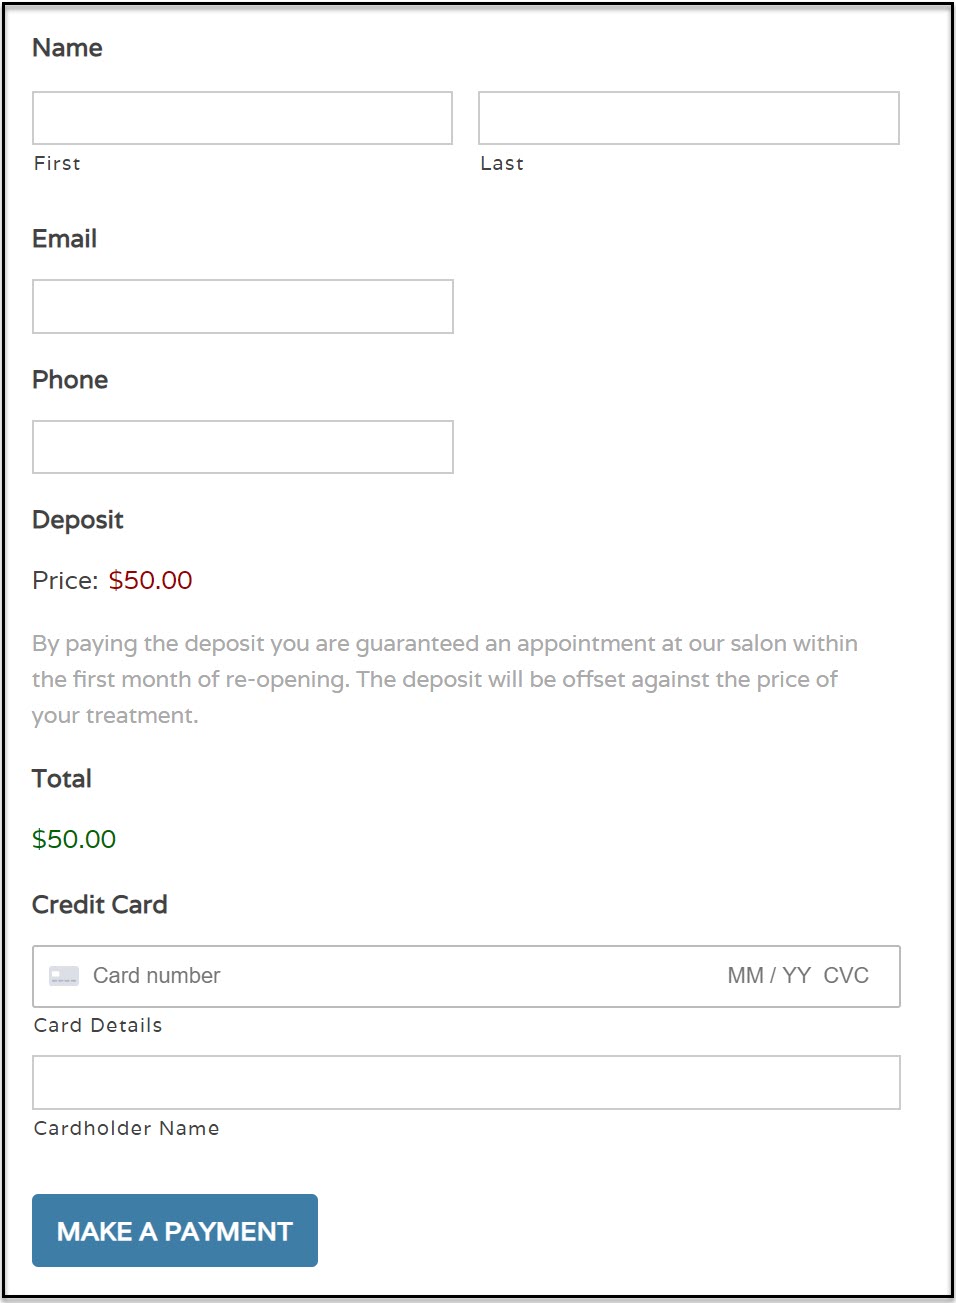 Payment Form - Secure Future Work